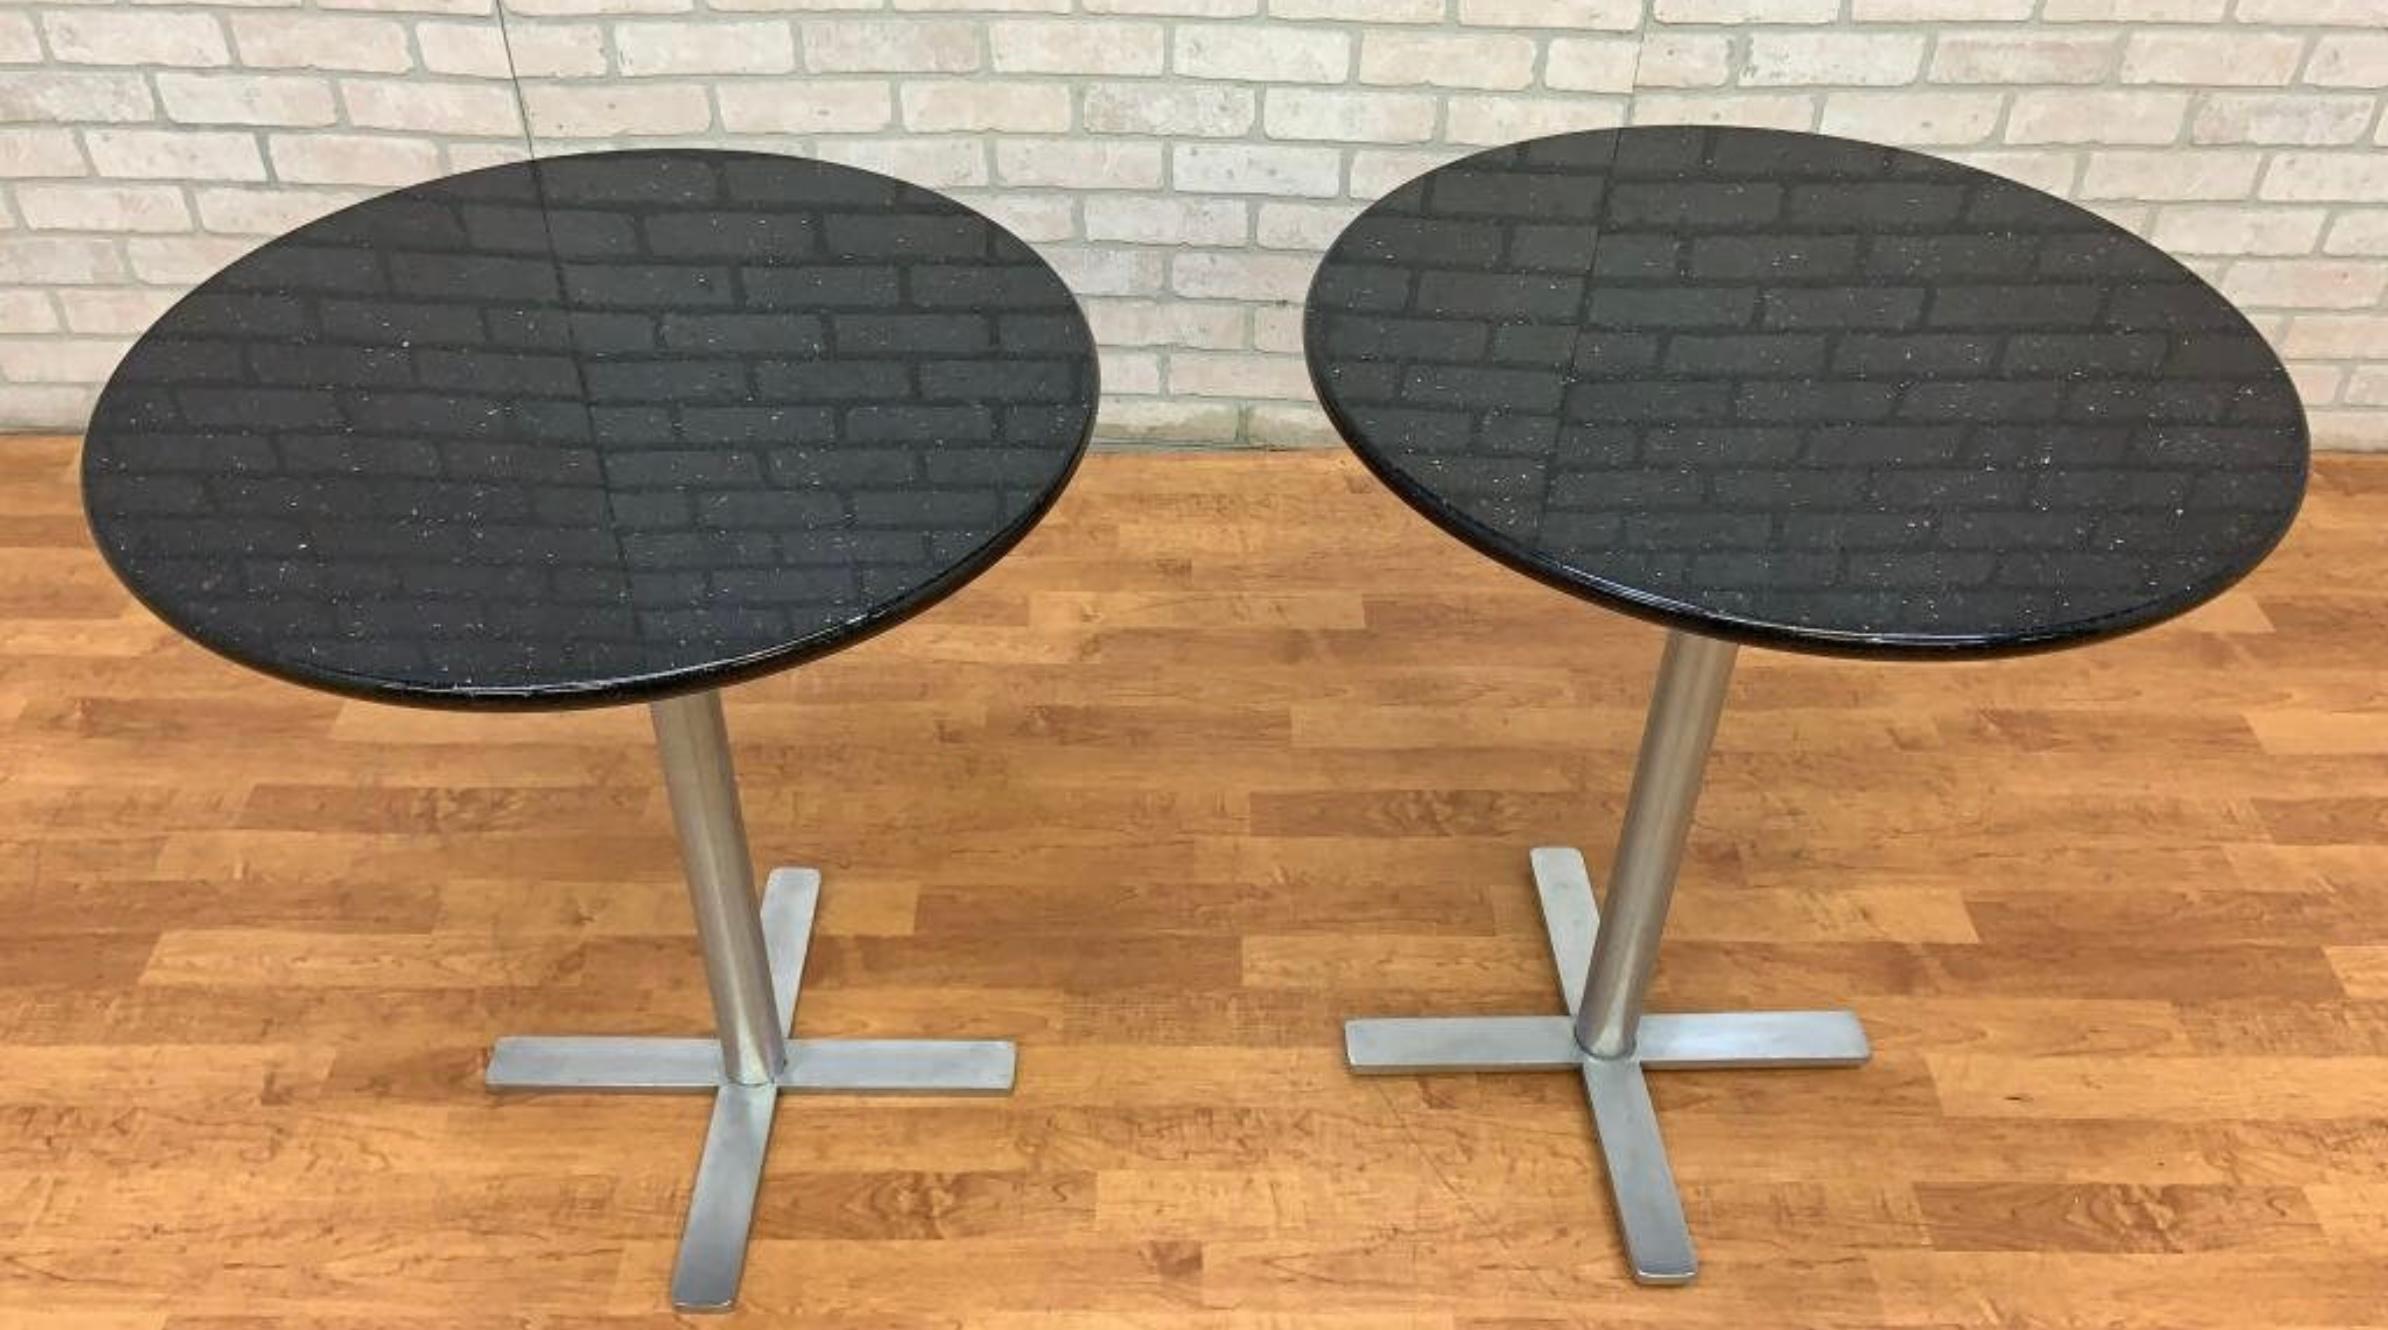 Vintage Round Granite Top Bistro Side Tables - Pair

Vintage pair of modern round granite top polished tops with steel bases bistro side tables.  

Circa: 1990s

Dimensions:

W: 24